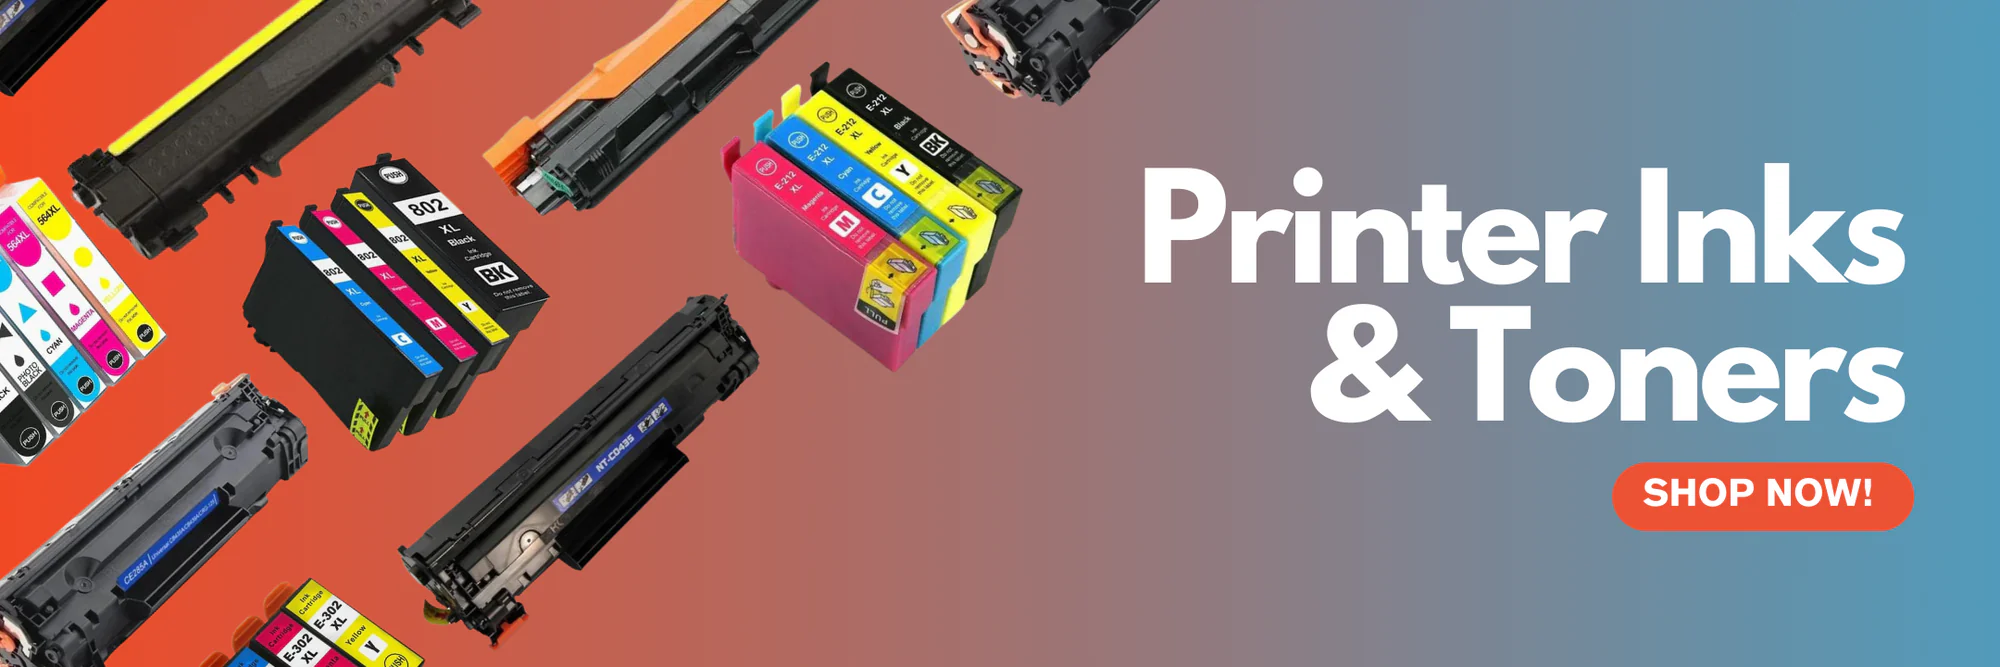 office supplies ink and toner banner